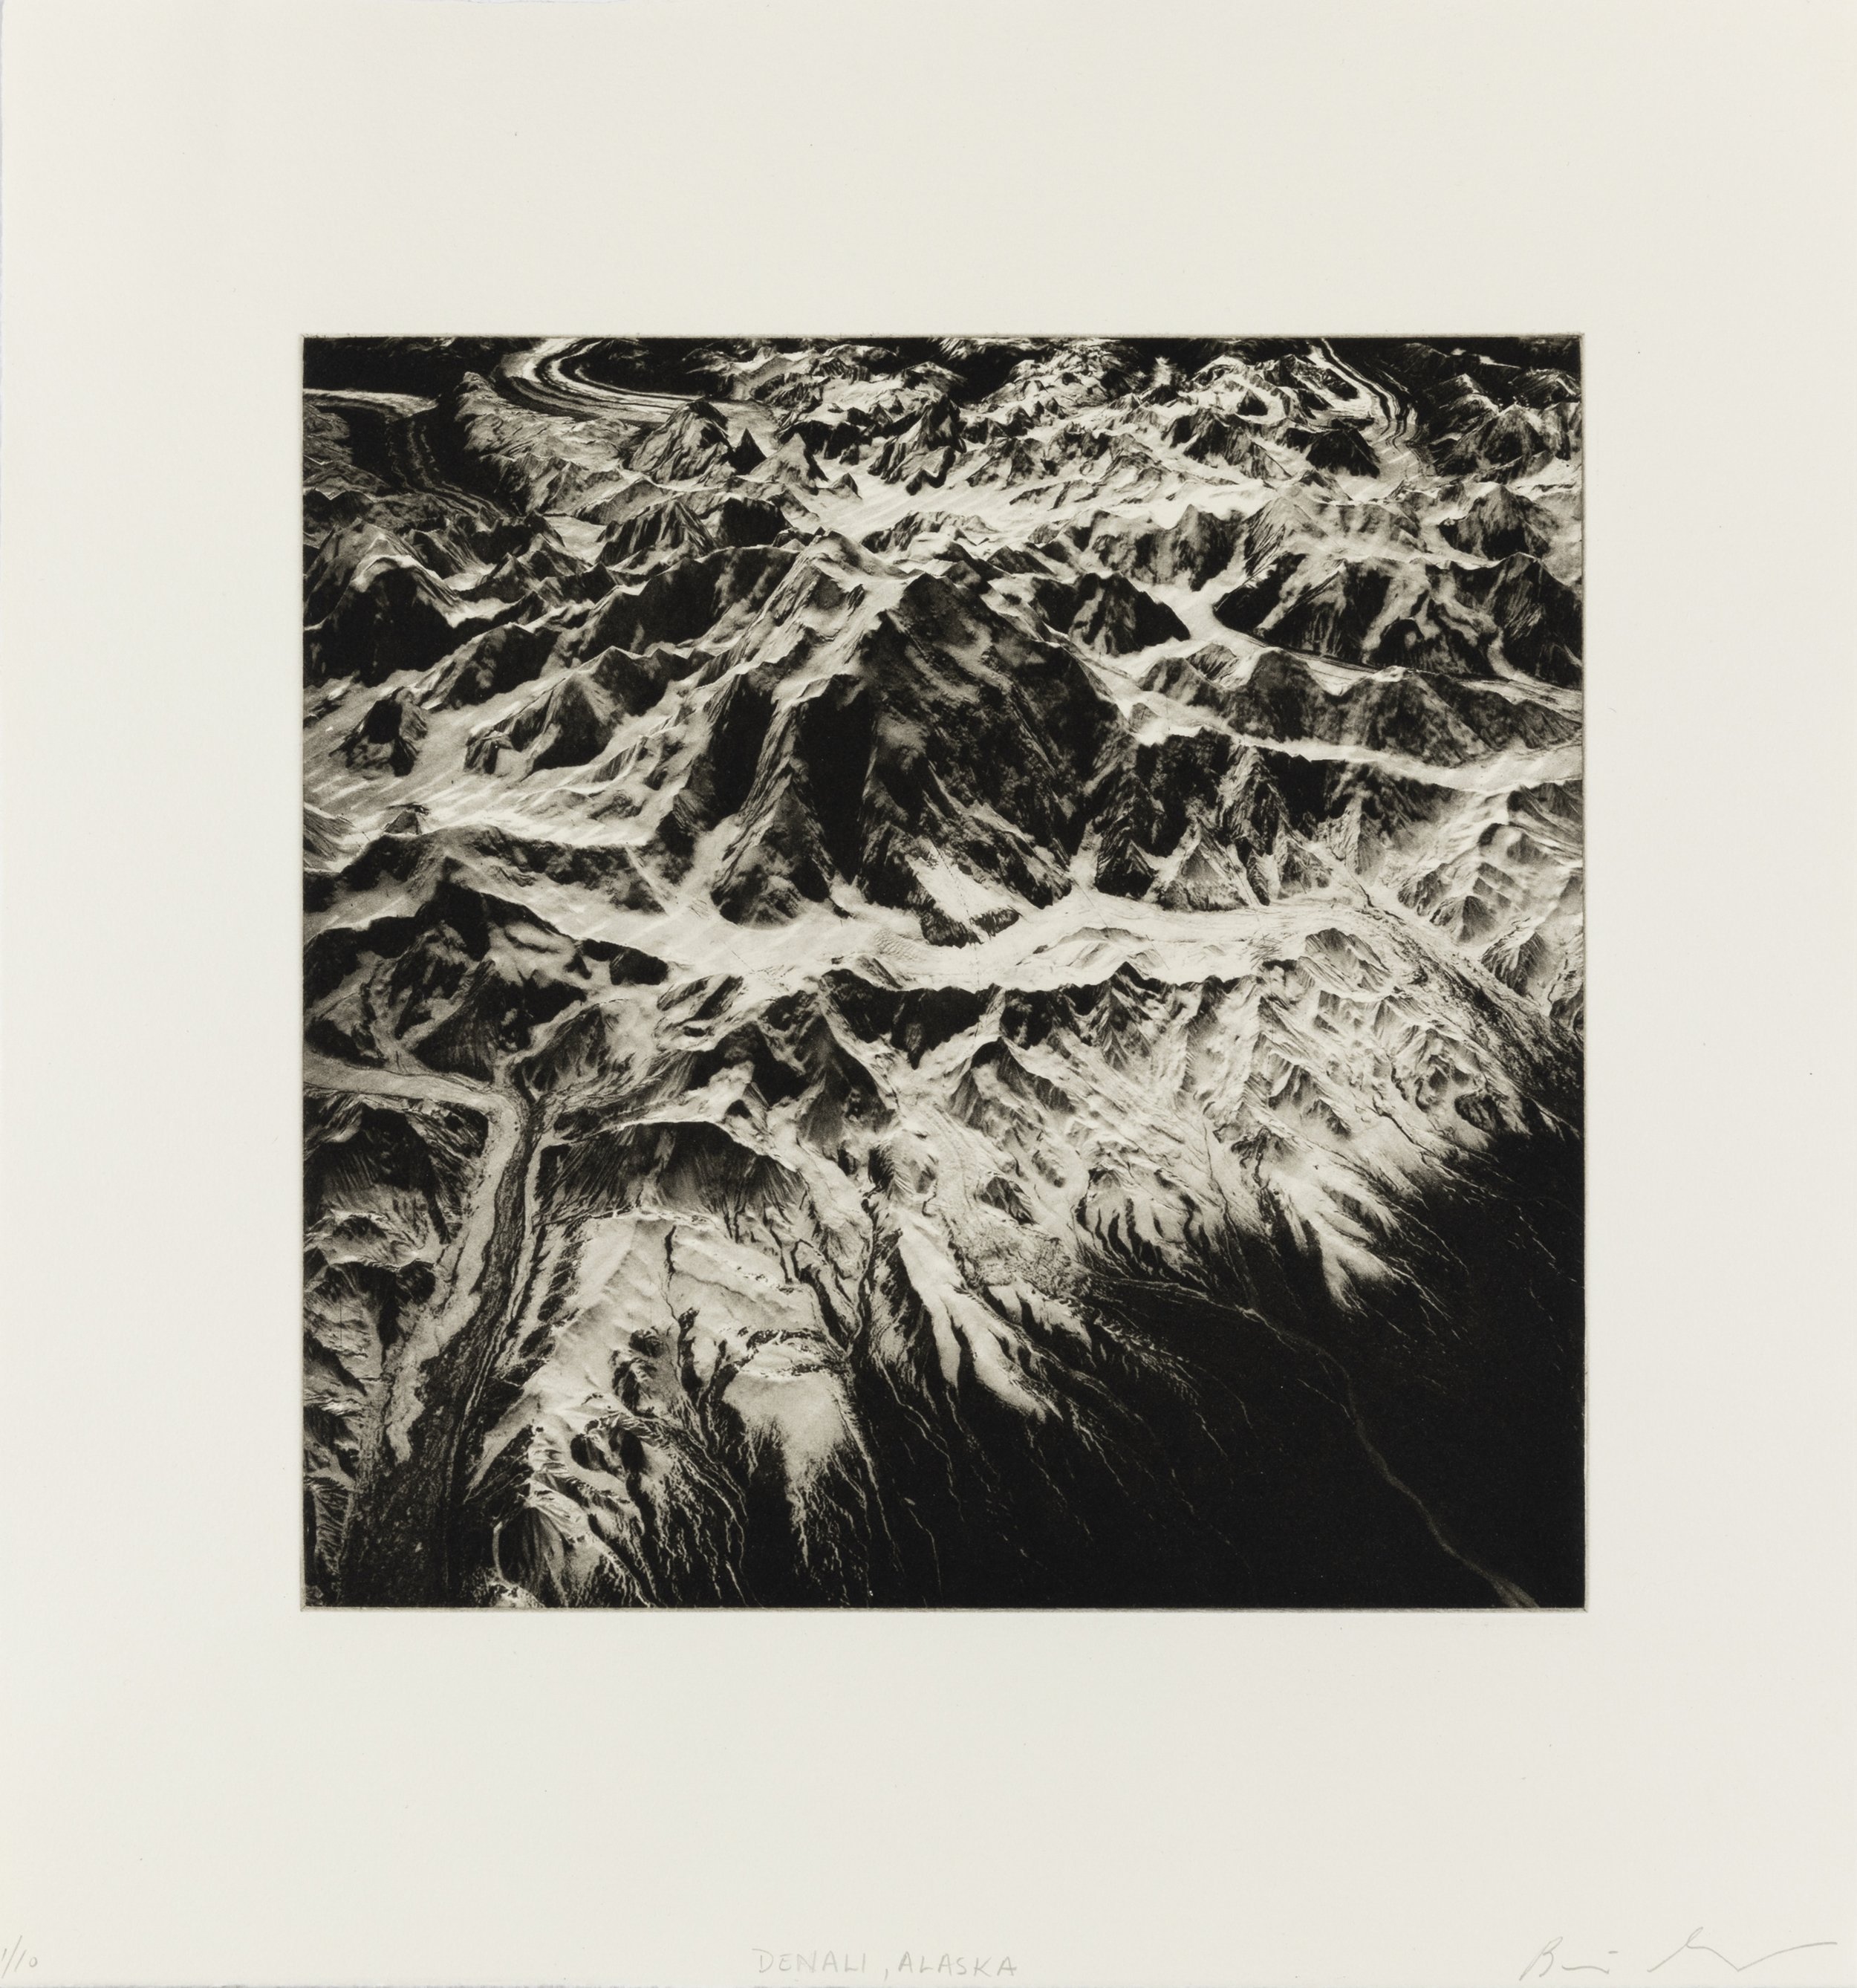    Denali, Alaska, 2021   Copperplate photogravure etching on cotton rag paper, plate size; 10.6 x 10.6, paper size; 16 x 15.5, edition 10        